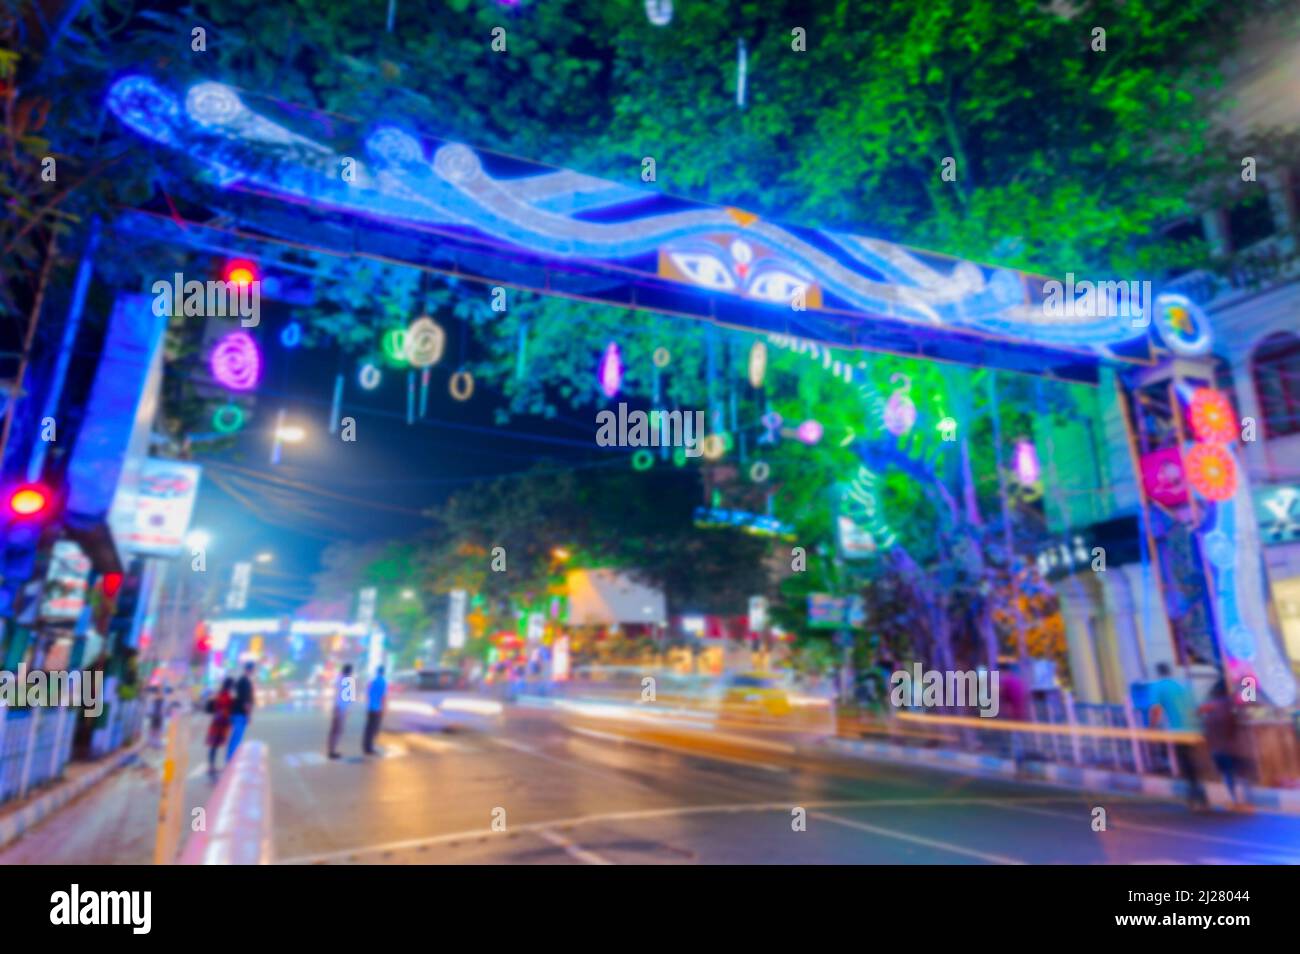 Blurred image of Park Street,Kolkata, India. Car head light trails at Park street area, decorated with diwali lights for the occassion of Diwali. Stock Photo